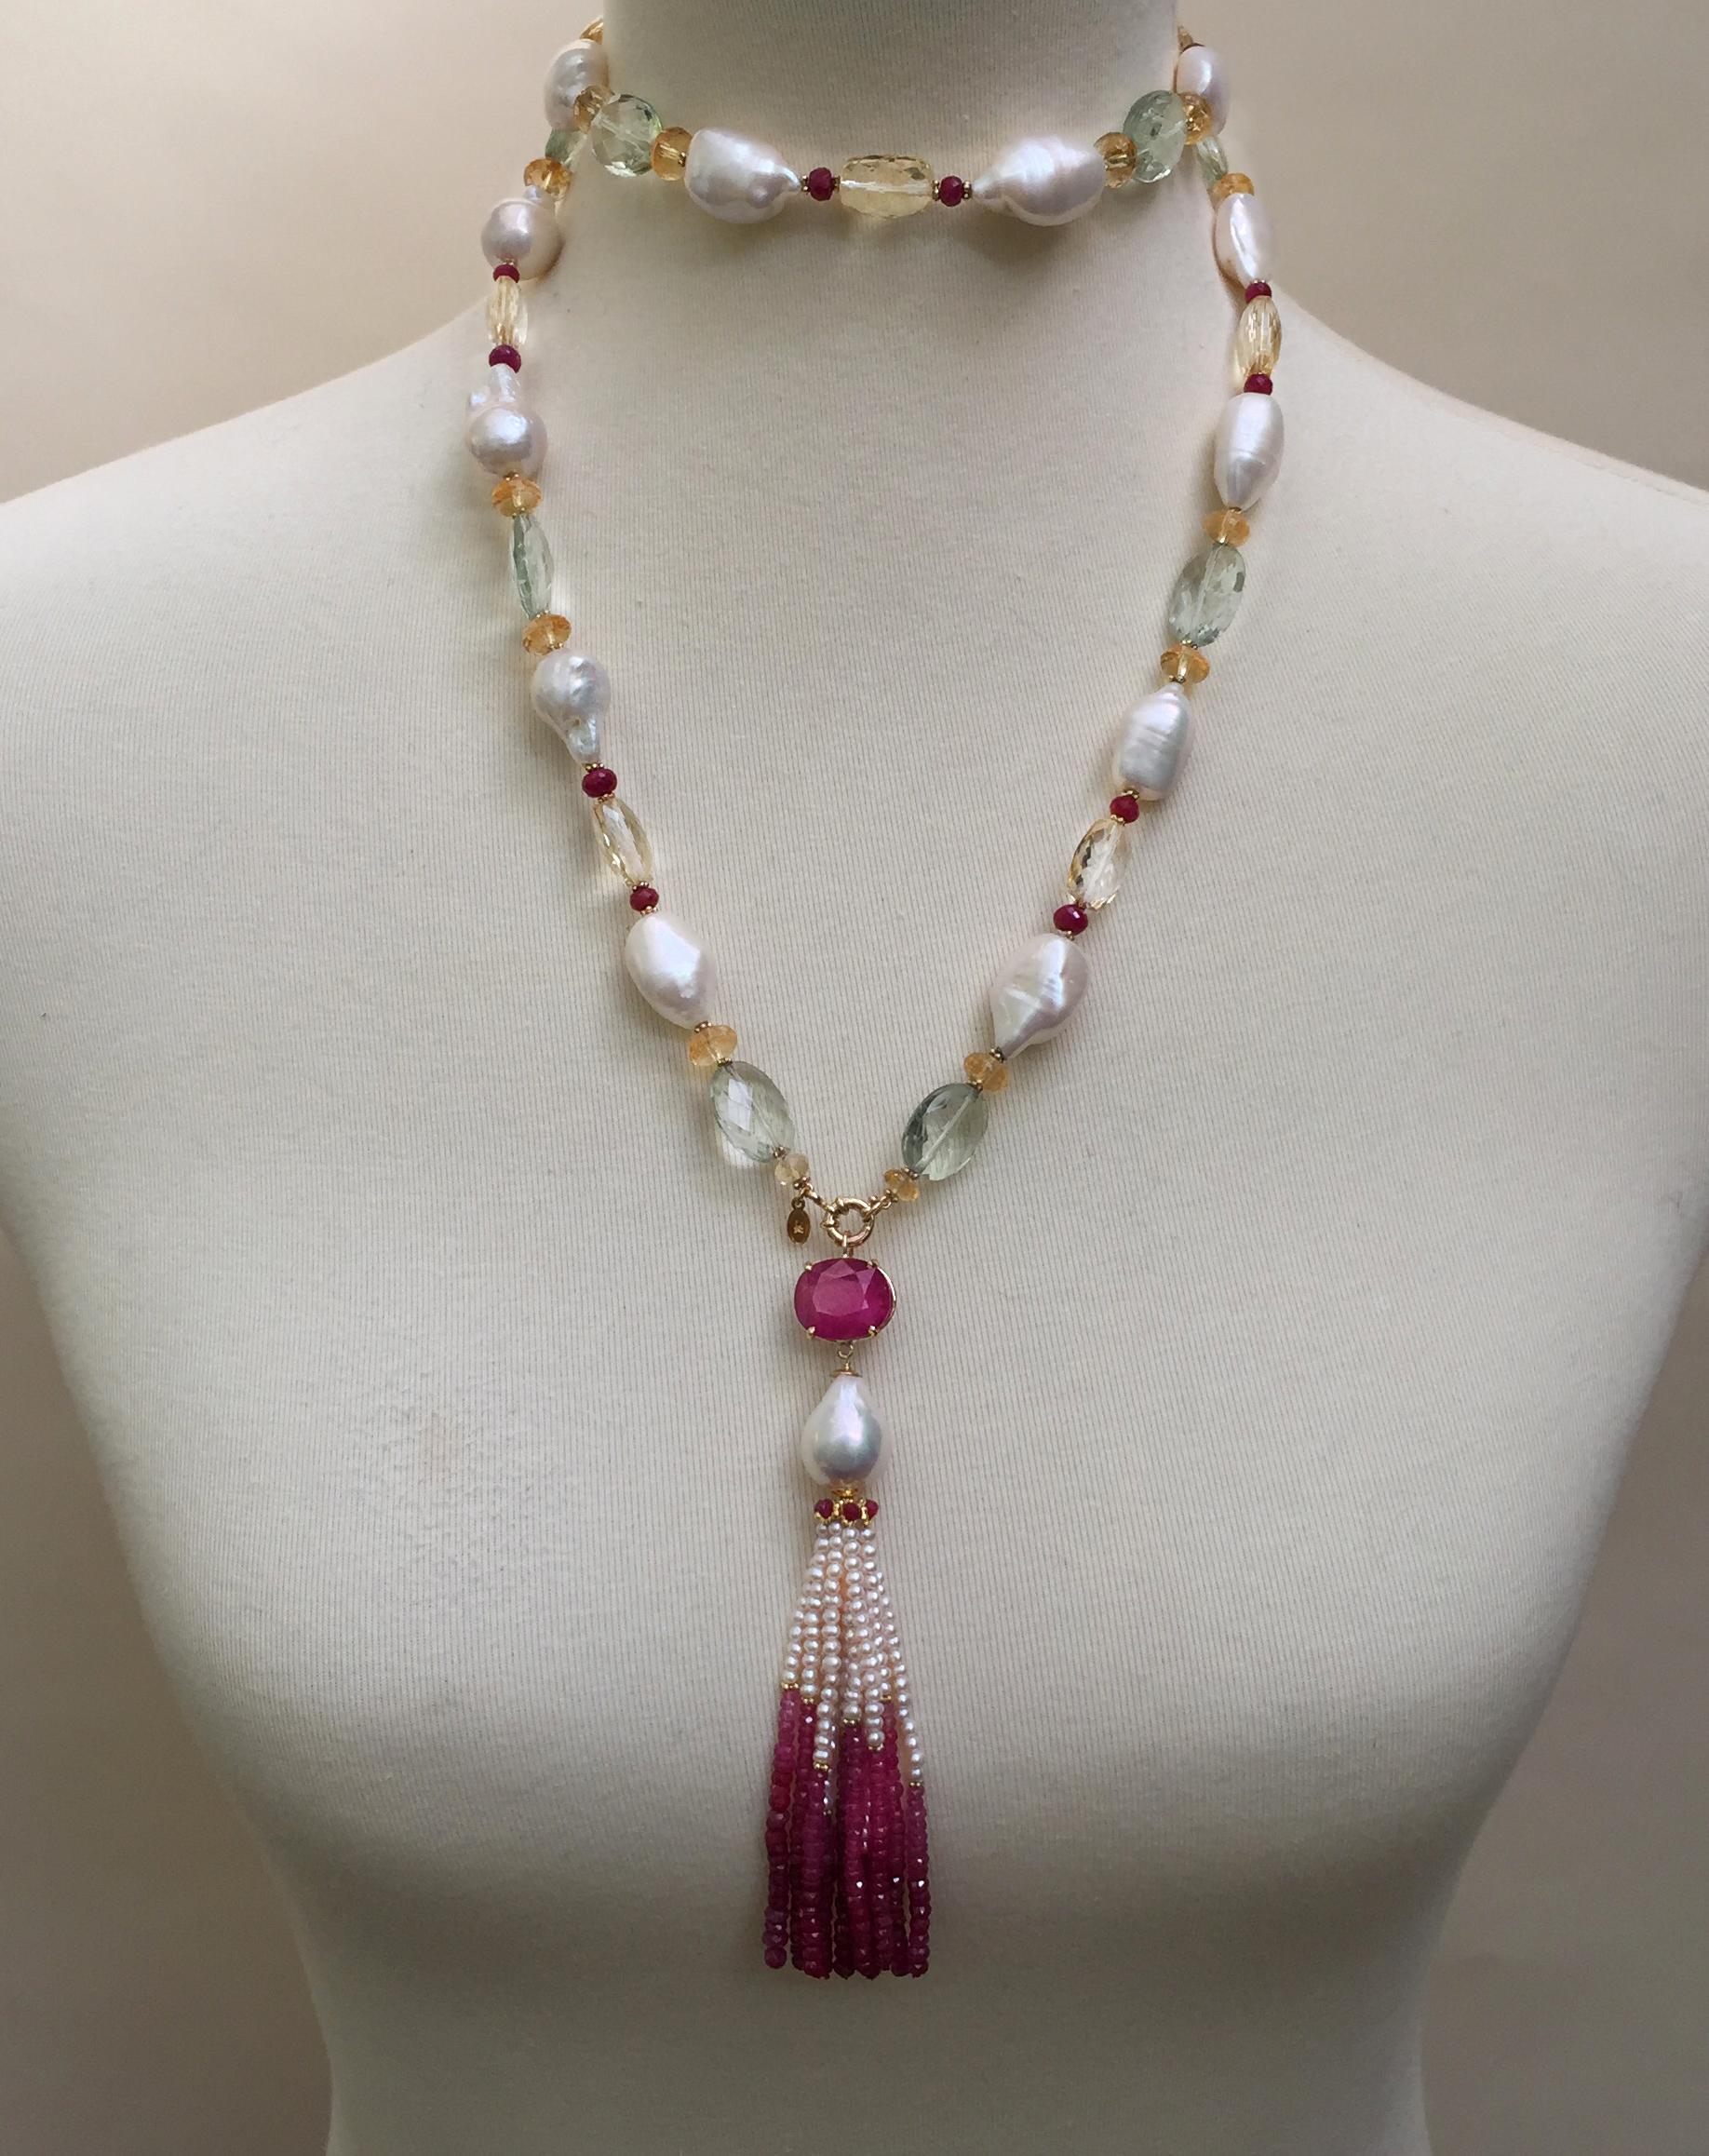 Vibrant ruby, citrine, topaz and 14k yellow gold beads are accented by a faceted ruby, pearl, and 14k gold tassel, creating a beautiful necklace. The centerpiece of the necklace is a striking red 15.77 carat oval faceted ruby and white oval pearl